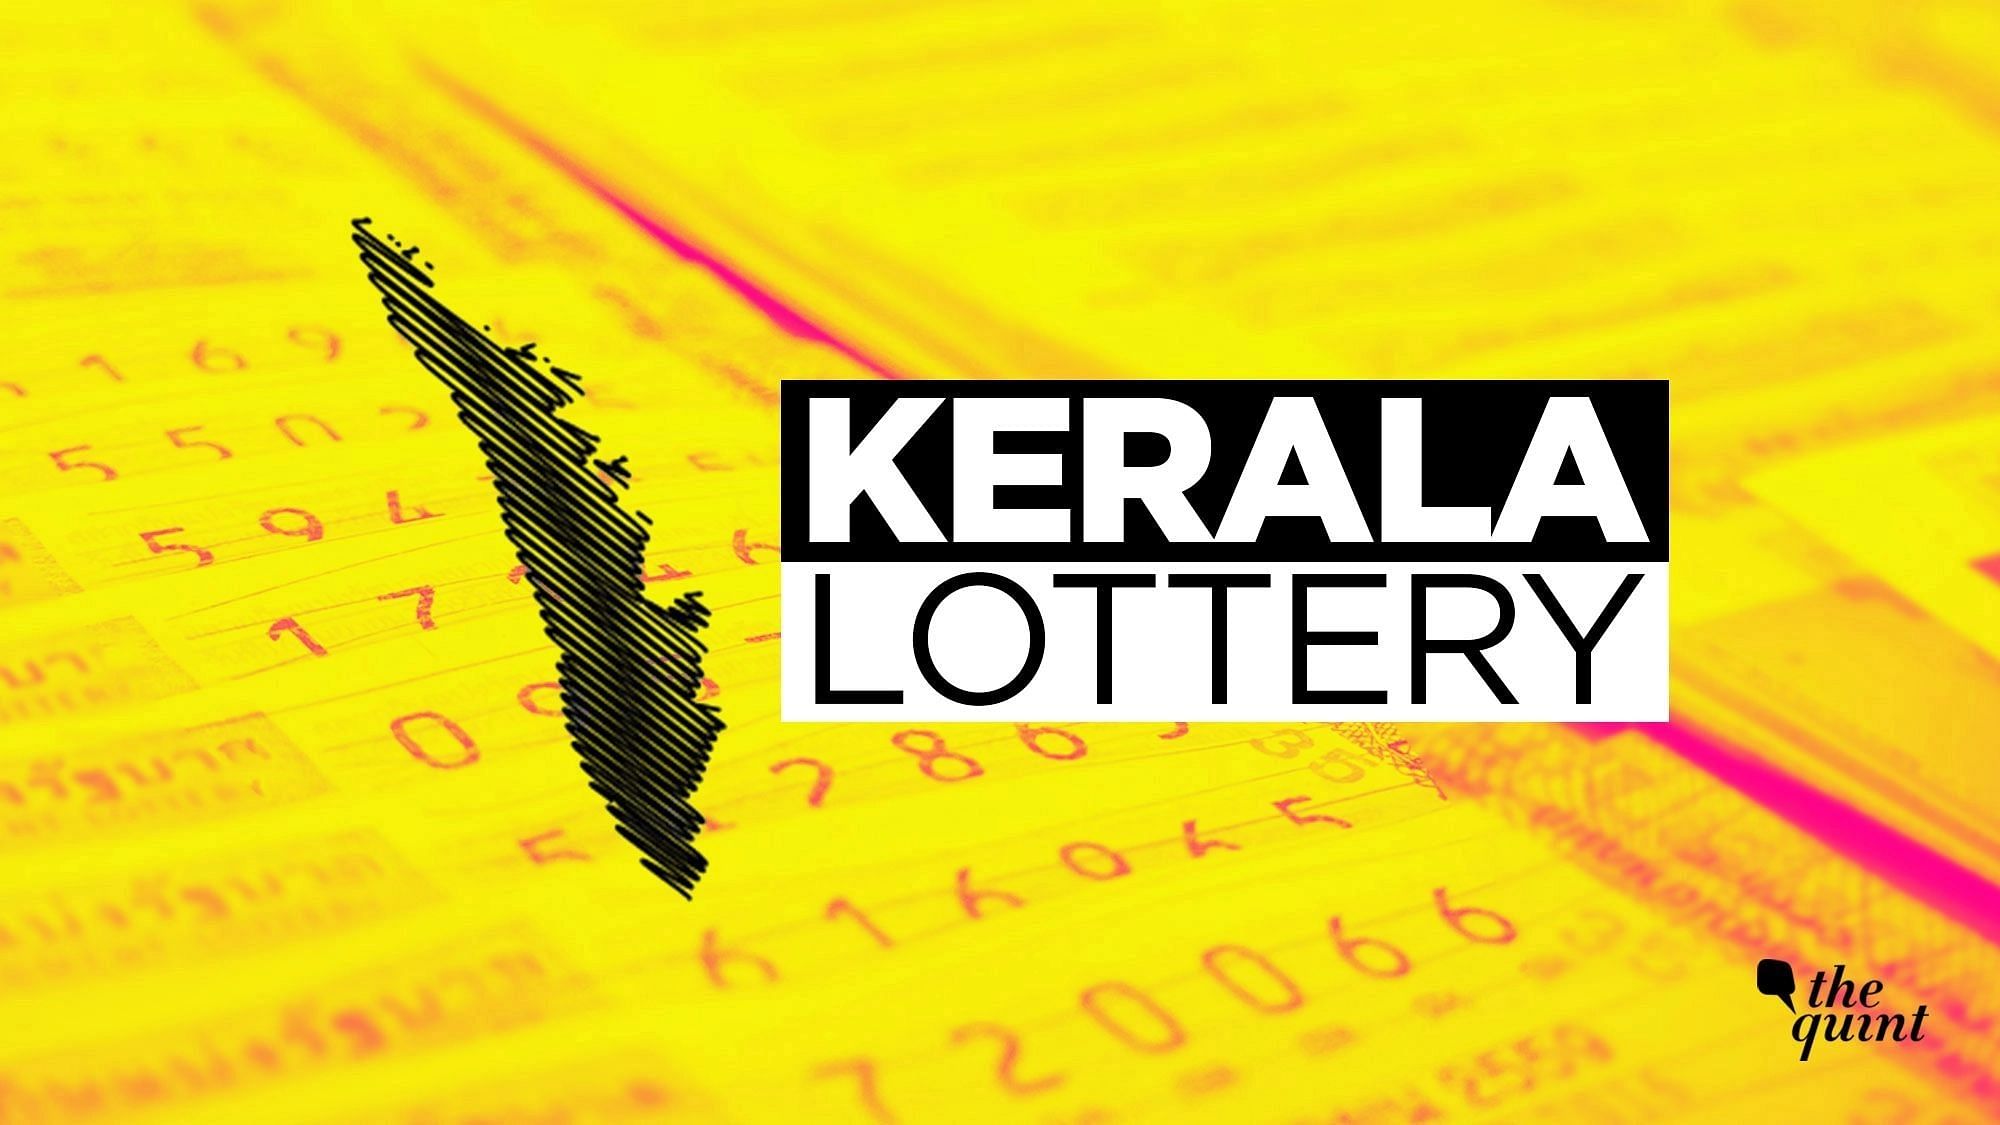 <div class="paragraphs"><p>The Kerala Lottery for Nirmal NR 287 prize details are stated here.</p></div>